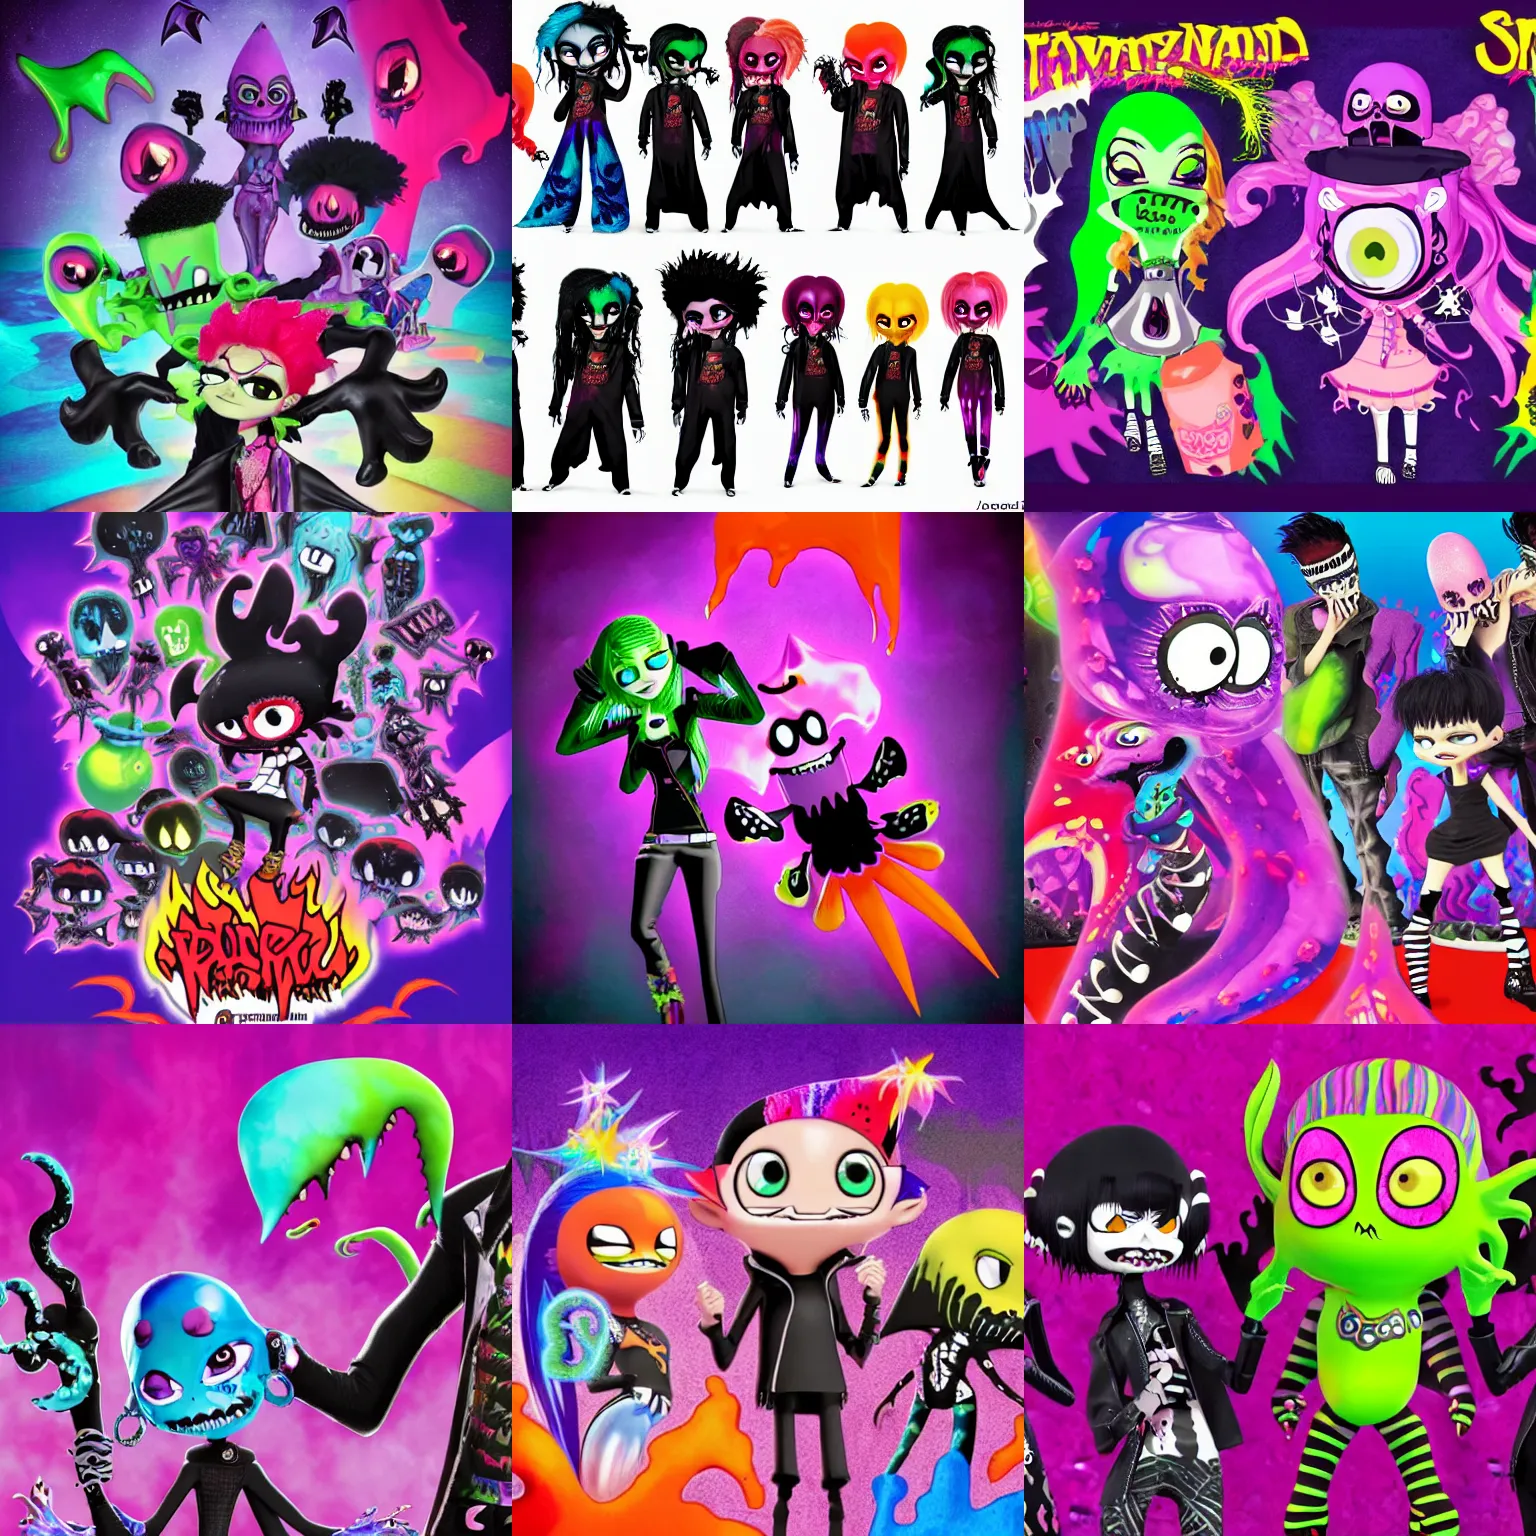 Prompt: CGI lisa frank gothic emo punk vampiric rockstar vampire squid with translucent skin conceptual character designs of various shapes and sizes by genndy tartakovsky and splatoon by nintendo for the new hotel transylvania film starring a vampire squid kraken monster rockstar